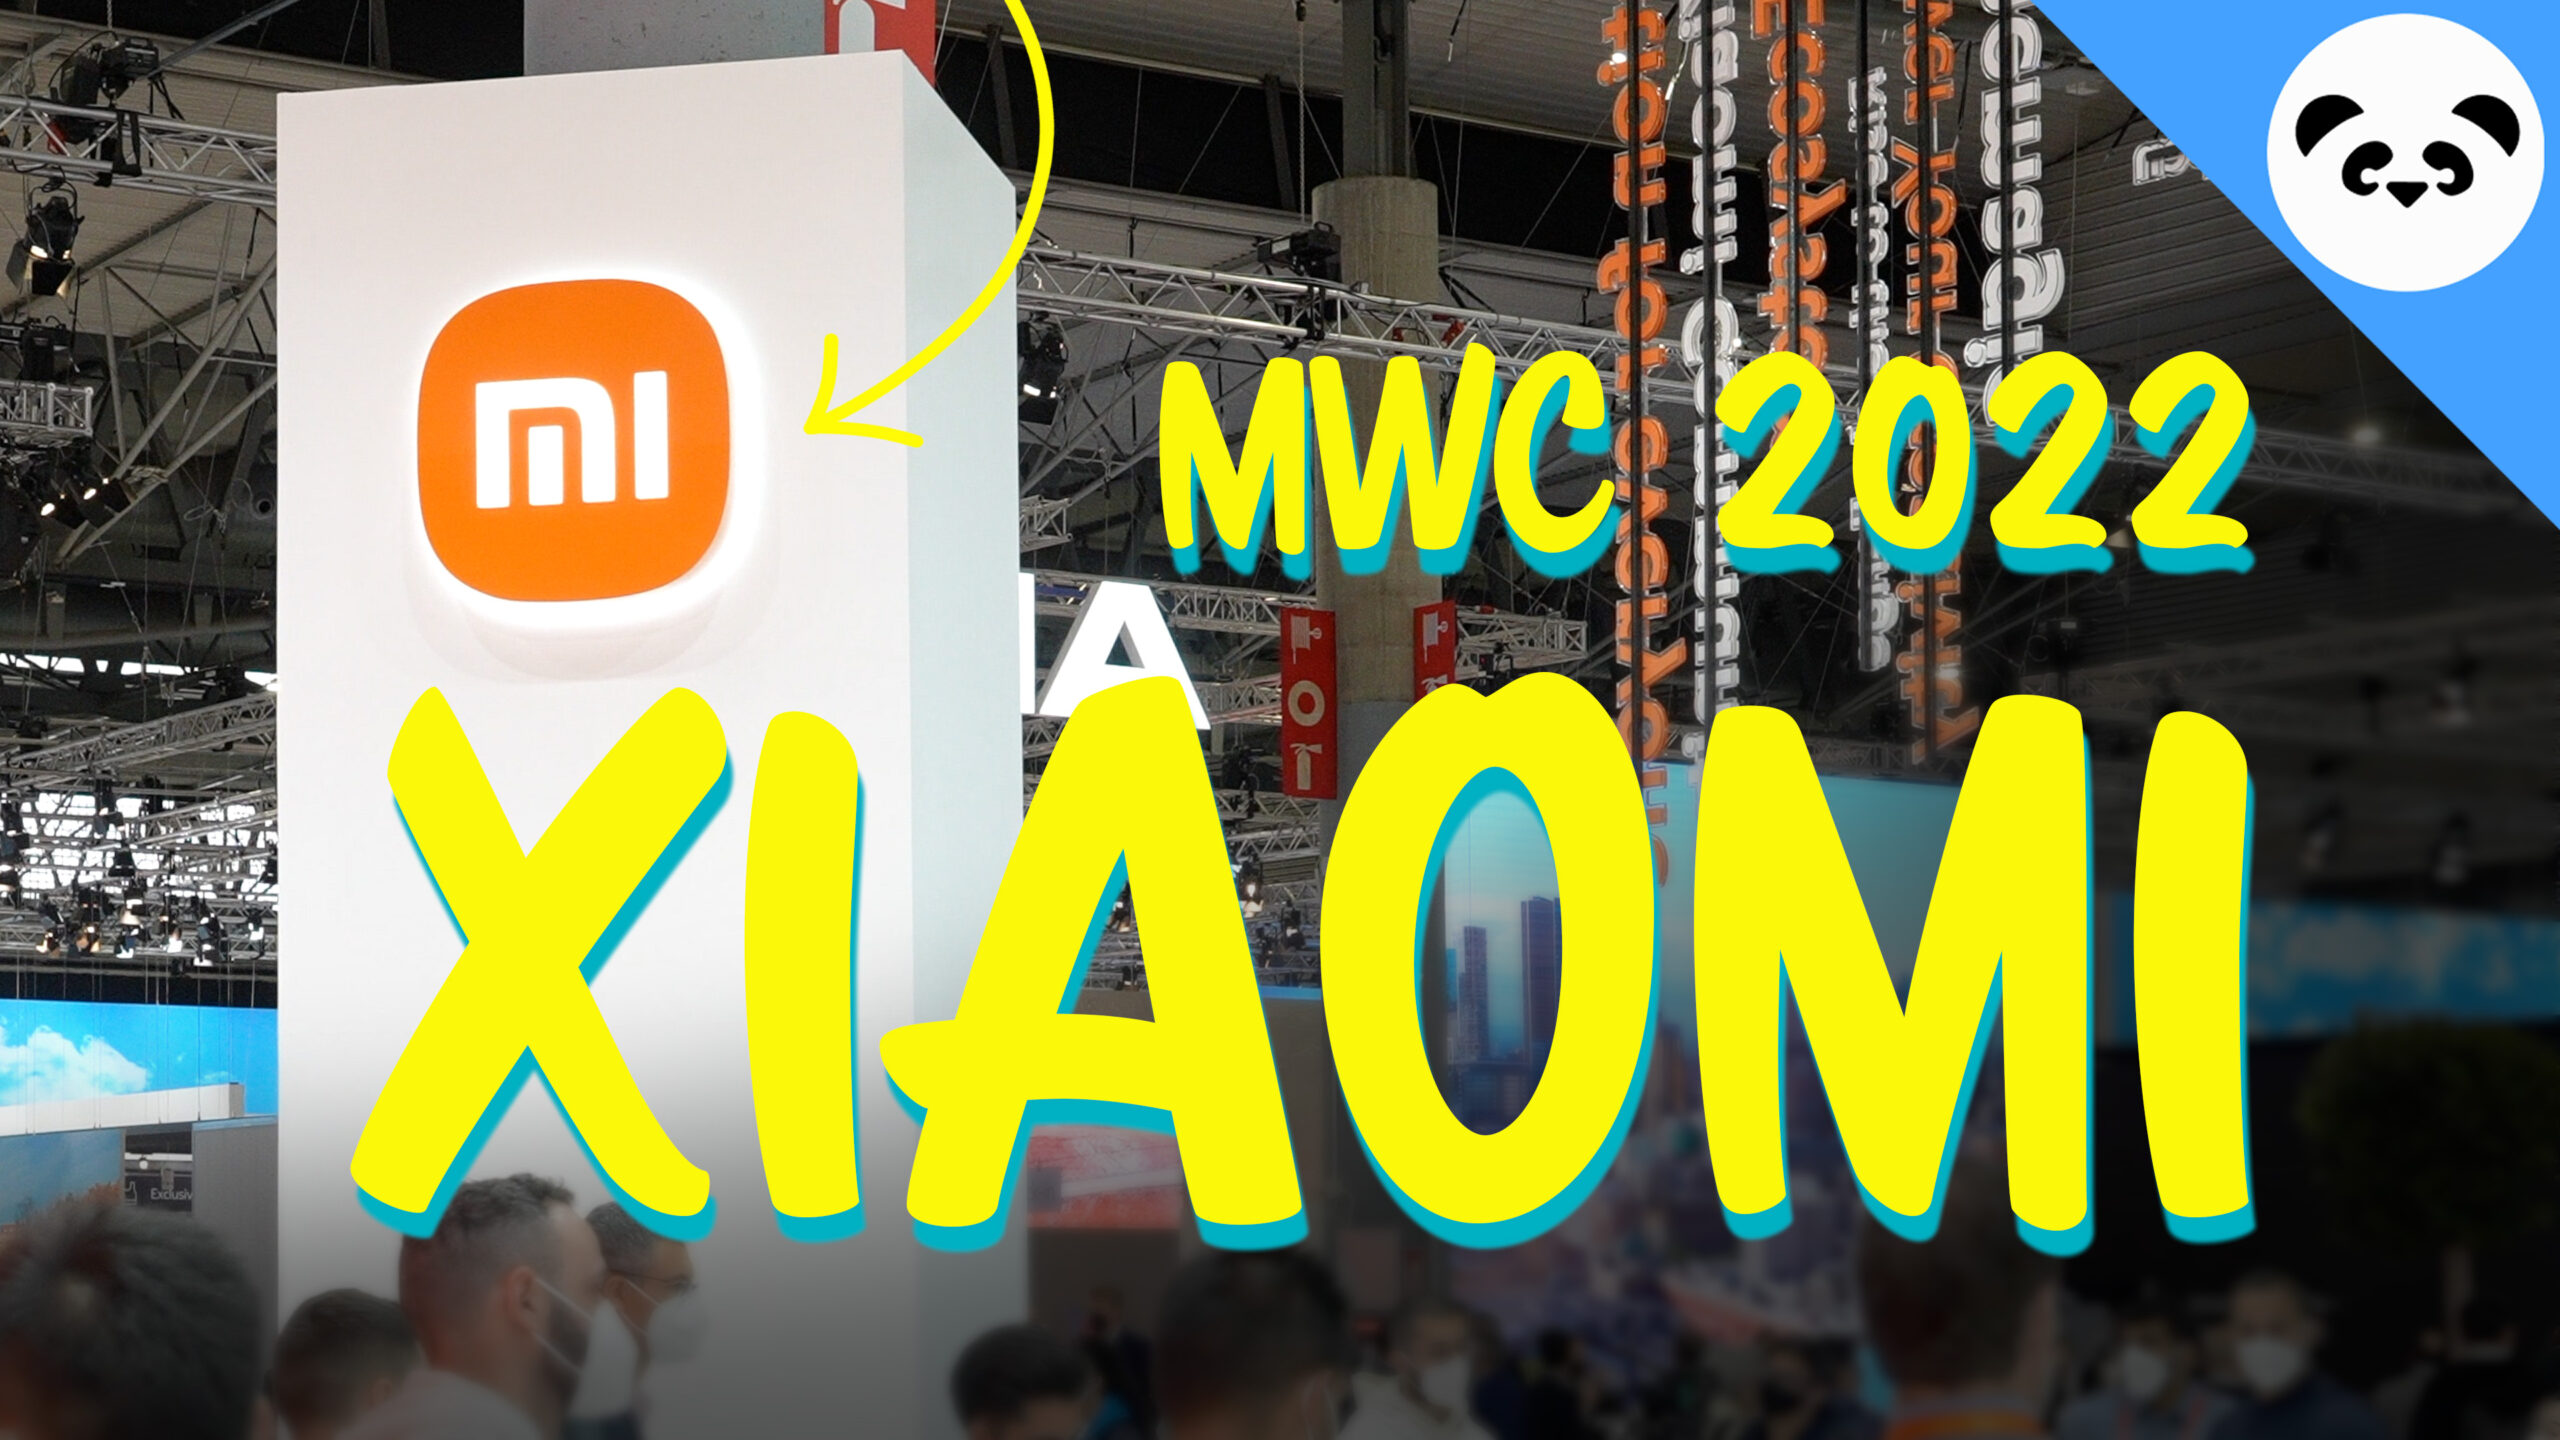 A Quick Overview of the Xiaomi Booth at MWC 2022